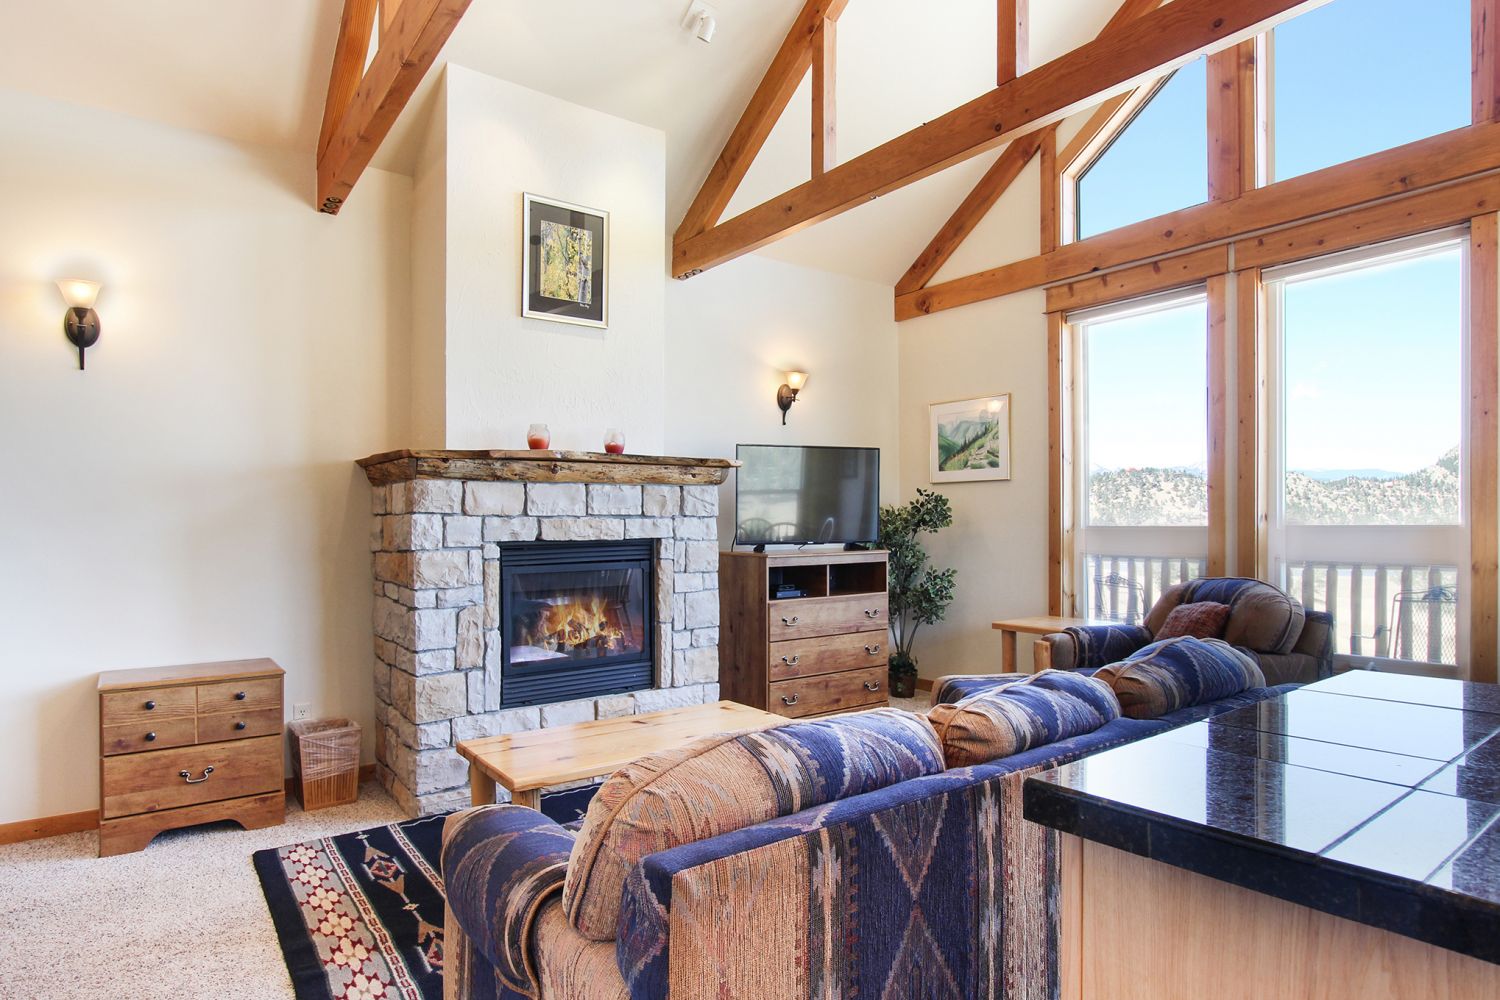 Comanche Peak 39 - Flat-screen TV and gorgeous stone fireplace in the main living area, floor to ceiling windows offer beautiful mountain views.